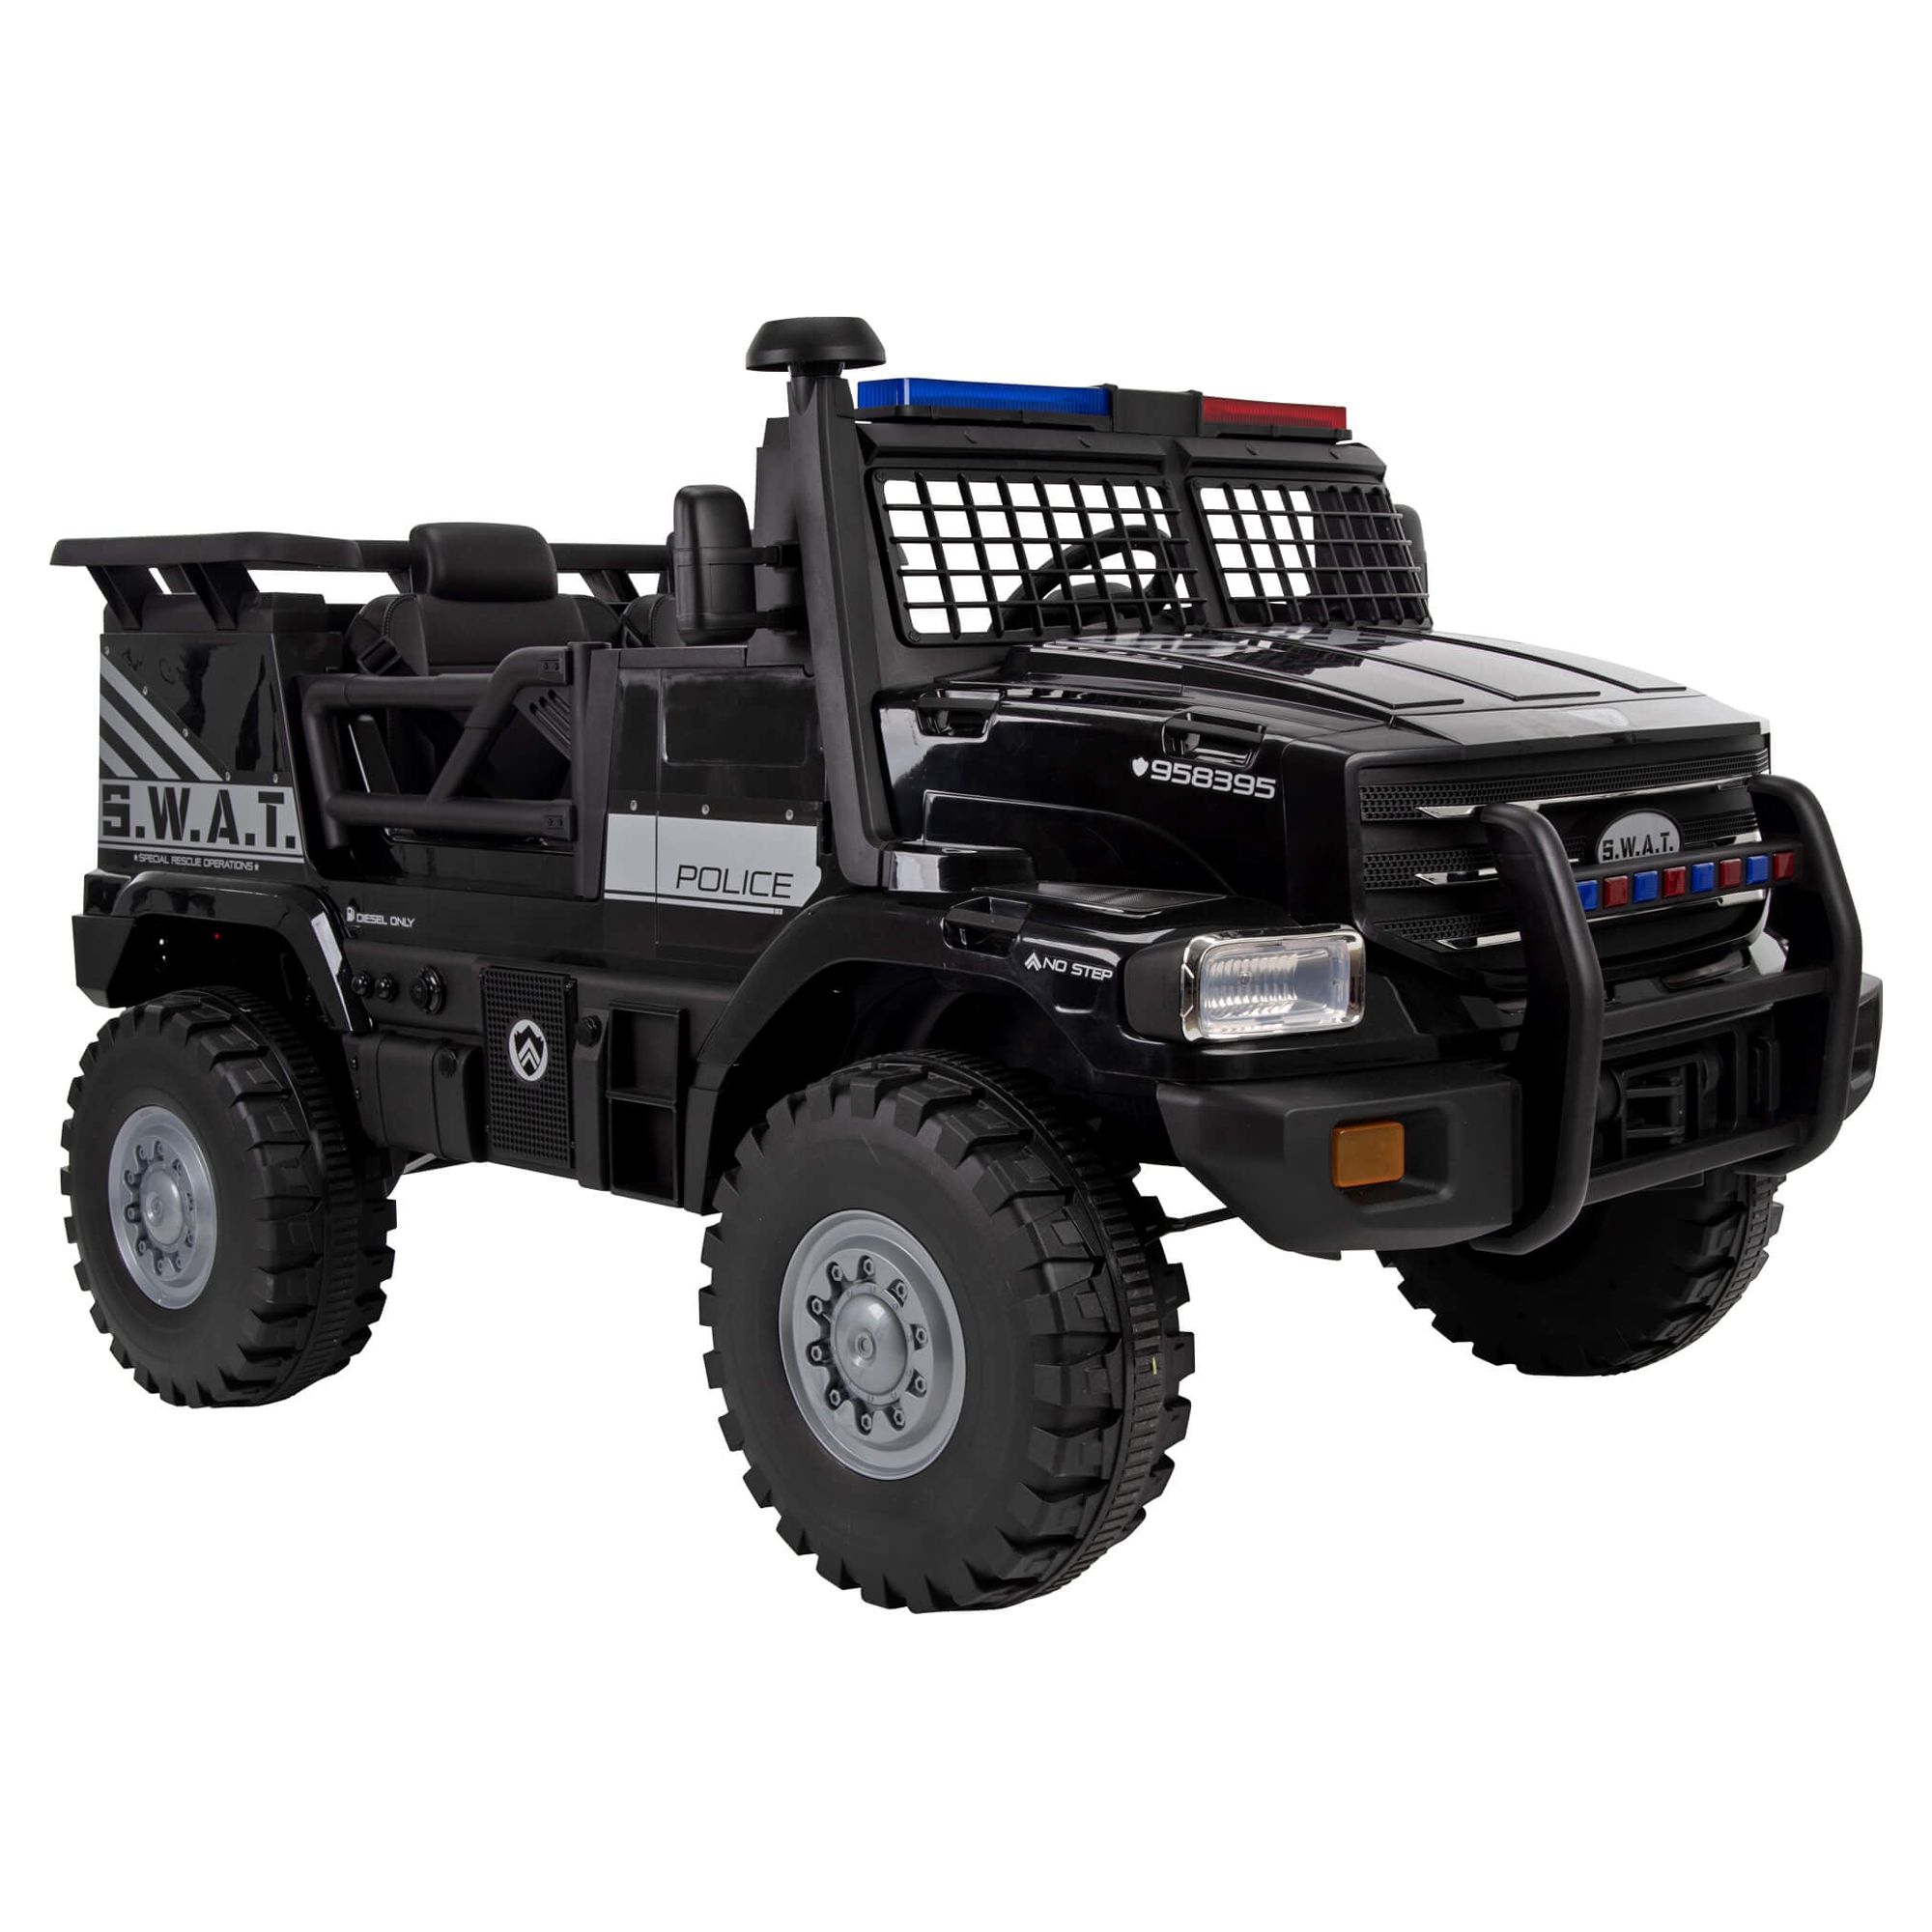 Huffy 12V Battery-Powered SWAT Truck 2-Seater Ride-On Toy - image 8 of 8